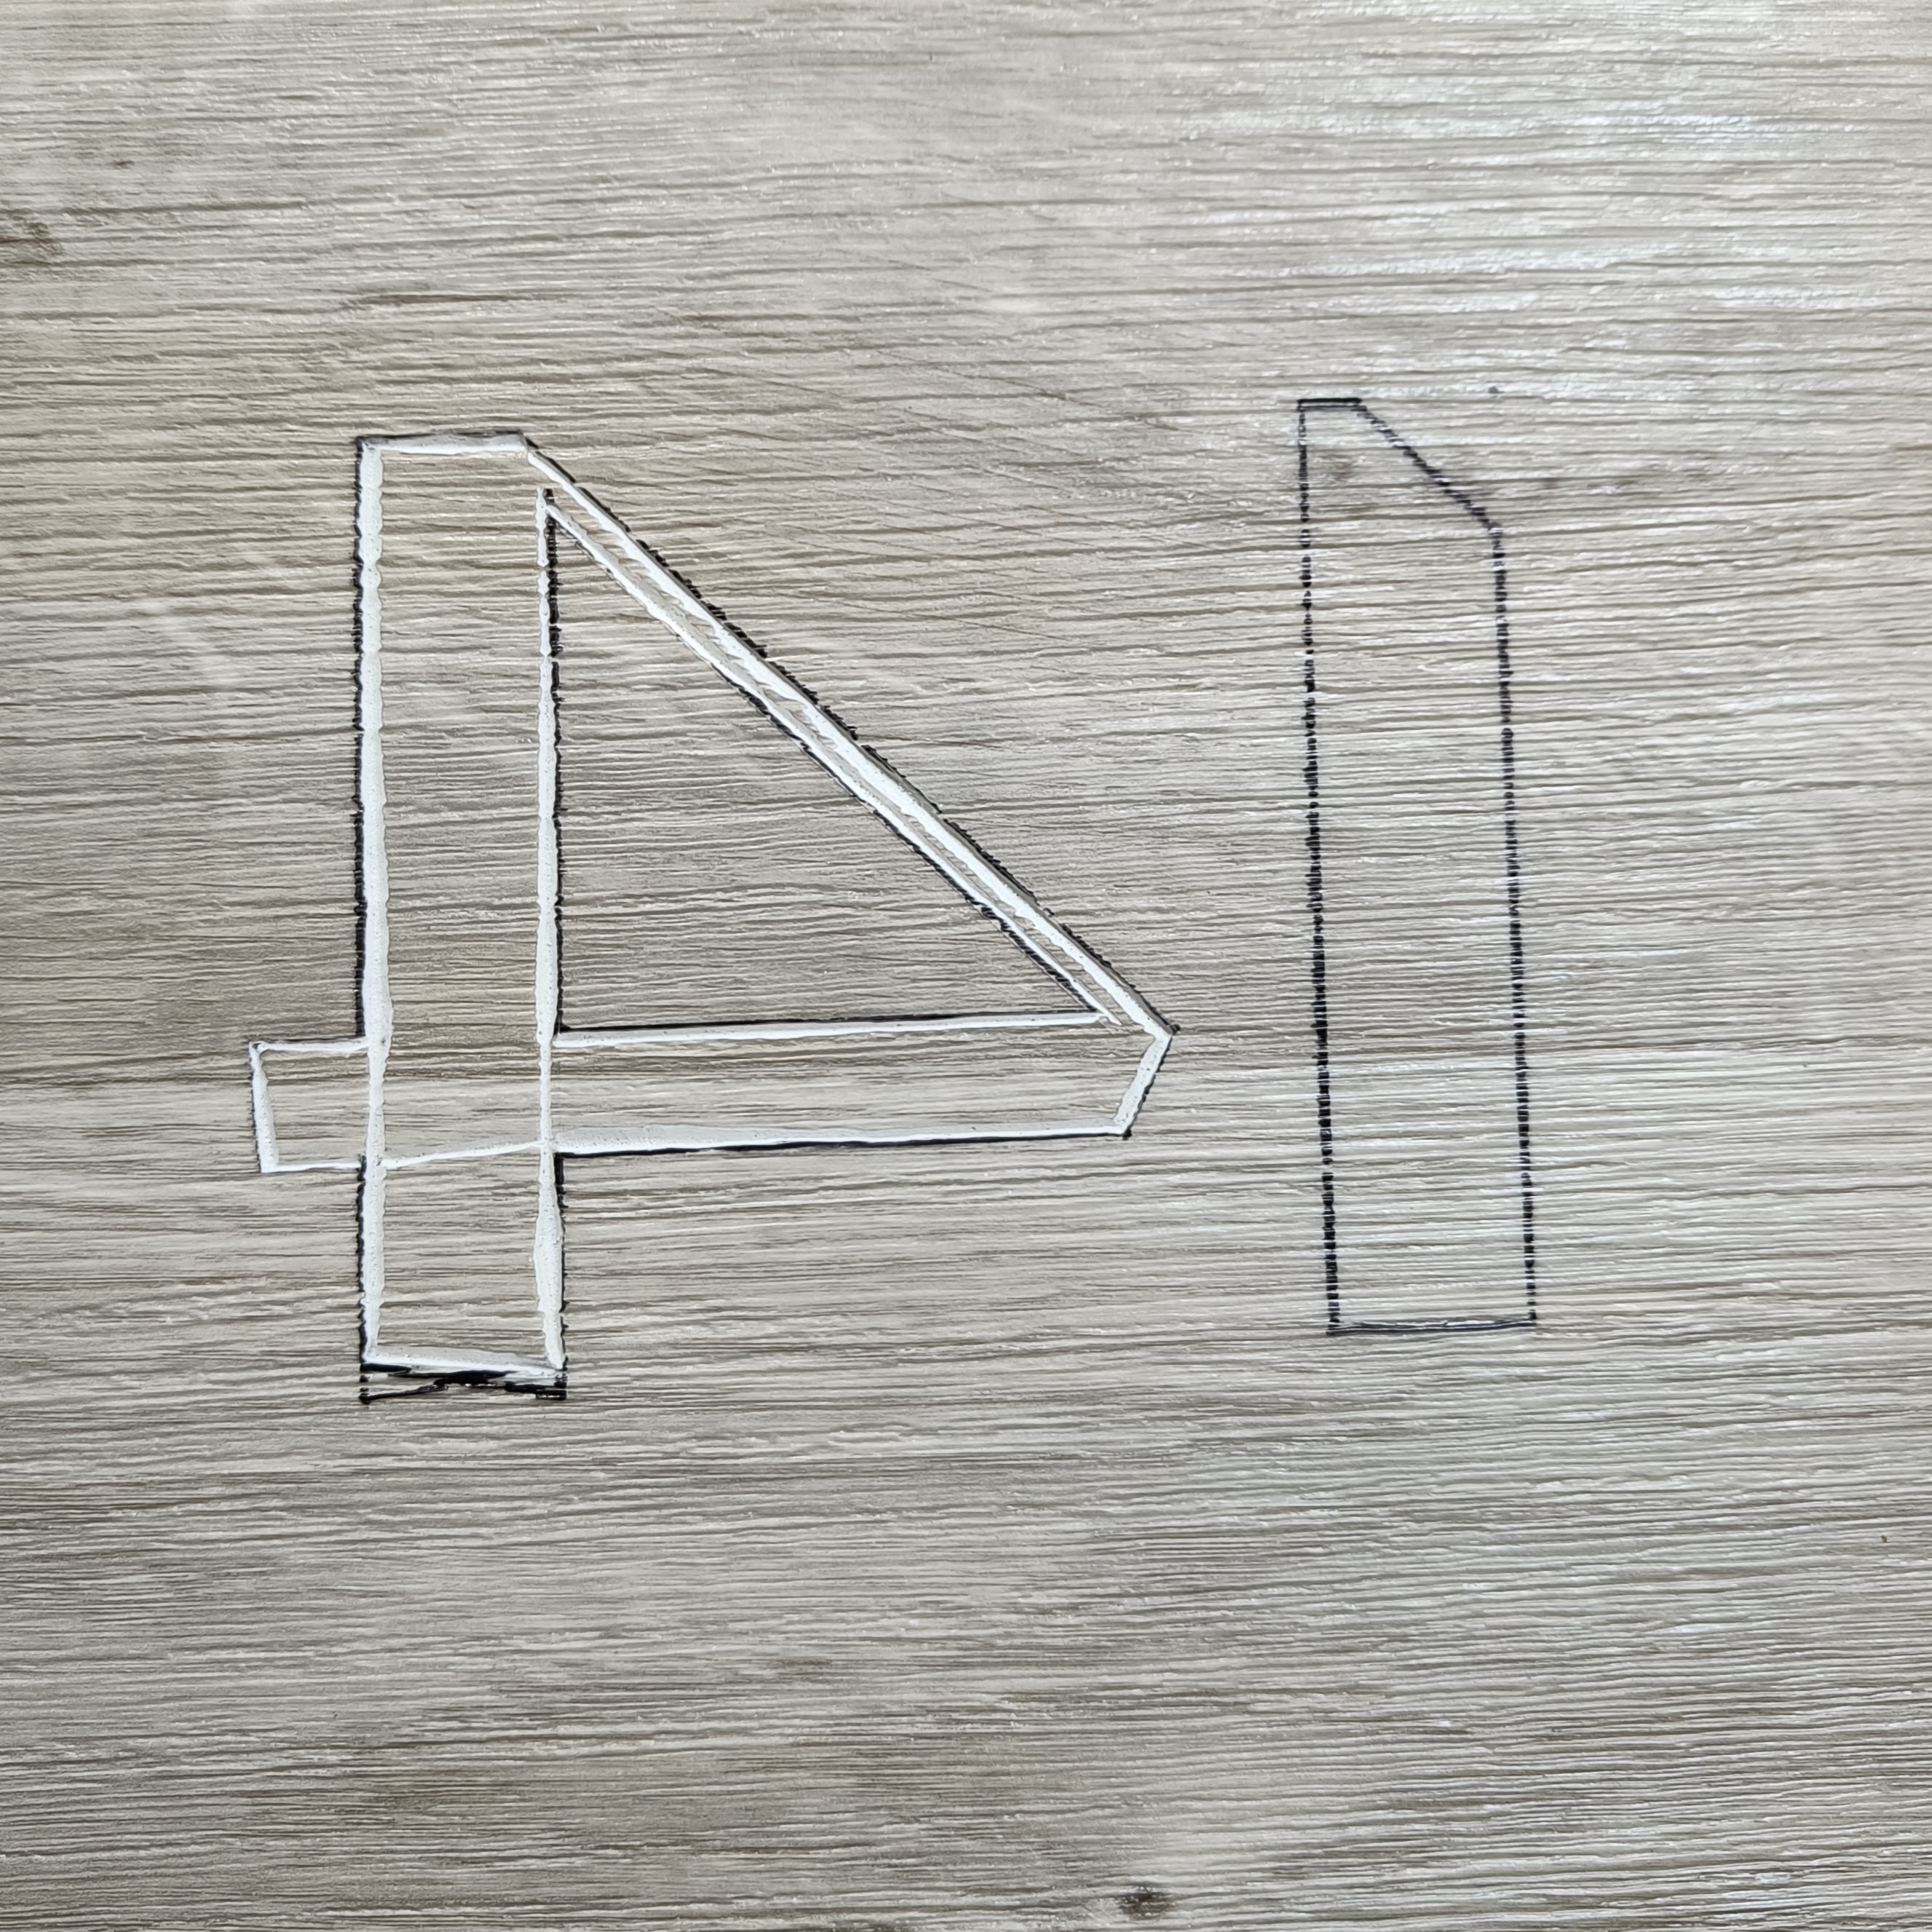 A «14» mirrored in outline on a piece of bathroom floor
  vinyl. The first cuts have been made into the lino to outline
  the figure 4.